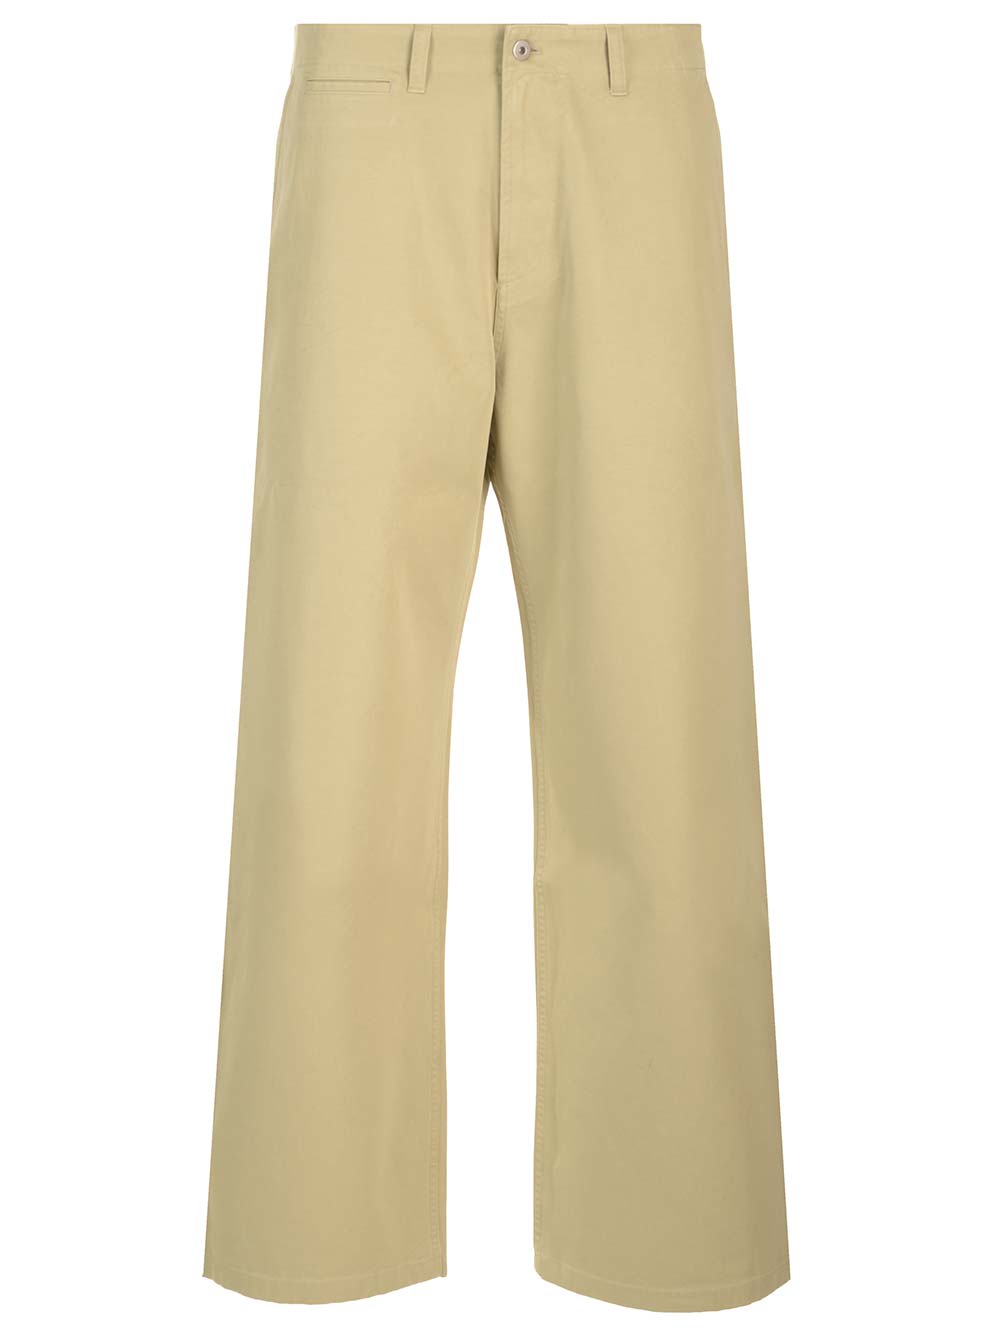 BURBERRY WIDE LEG CHINO TROUSERS